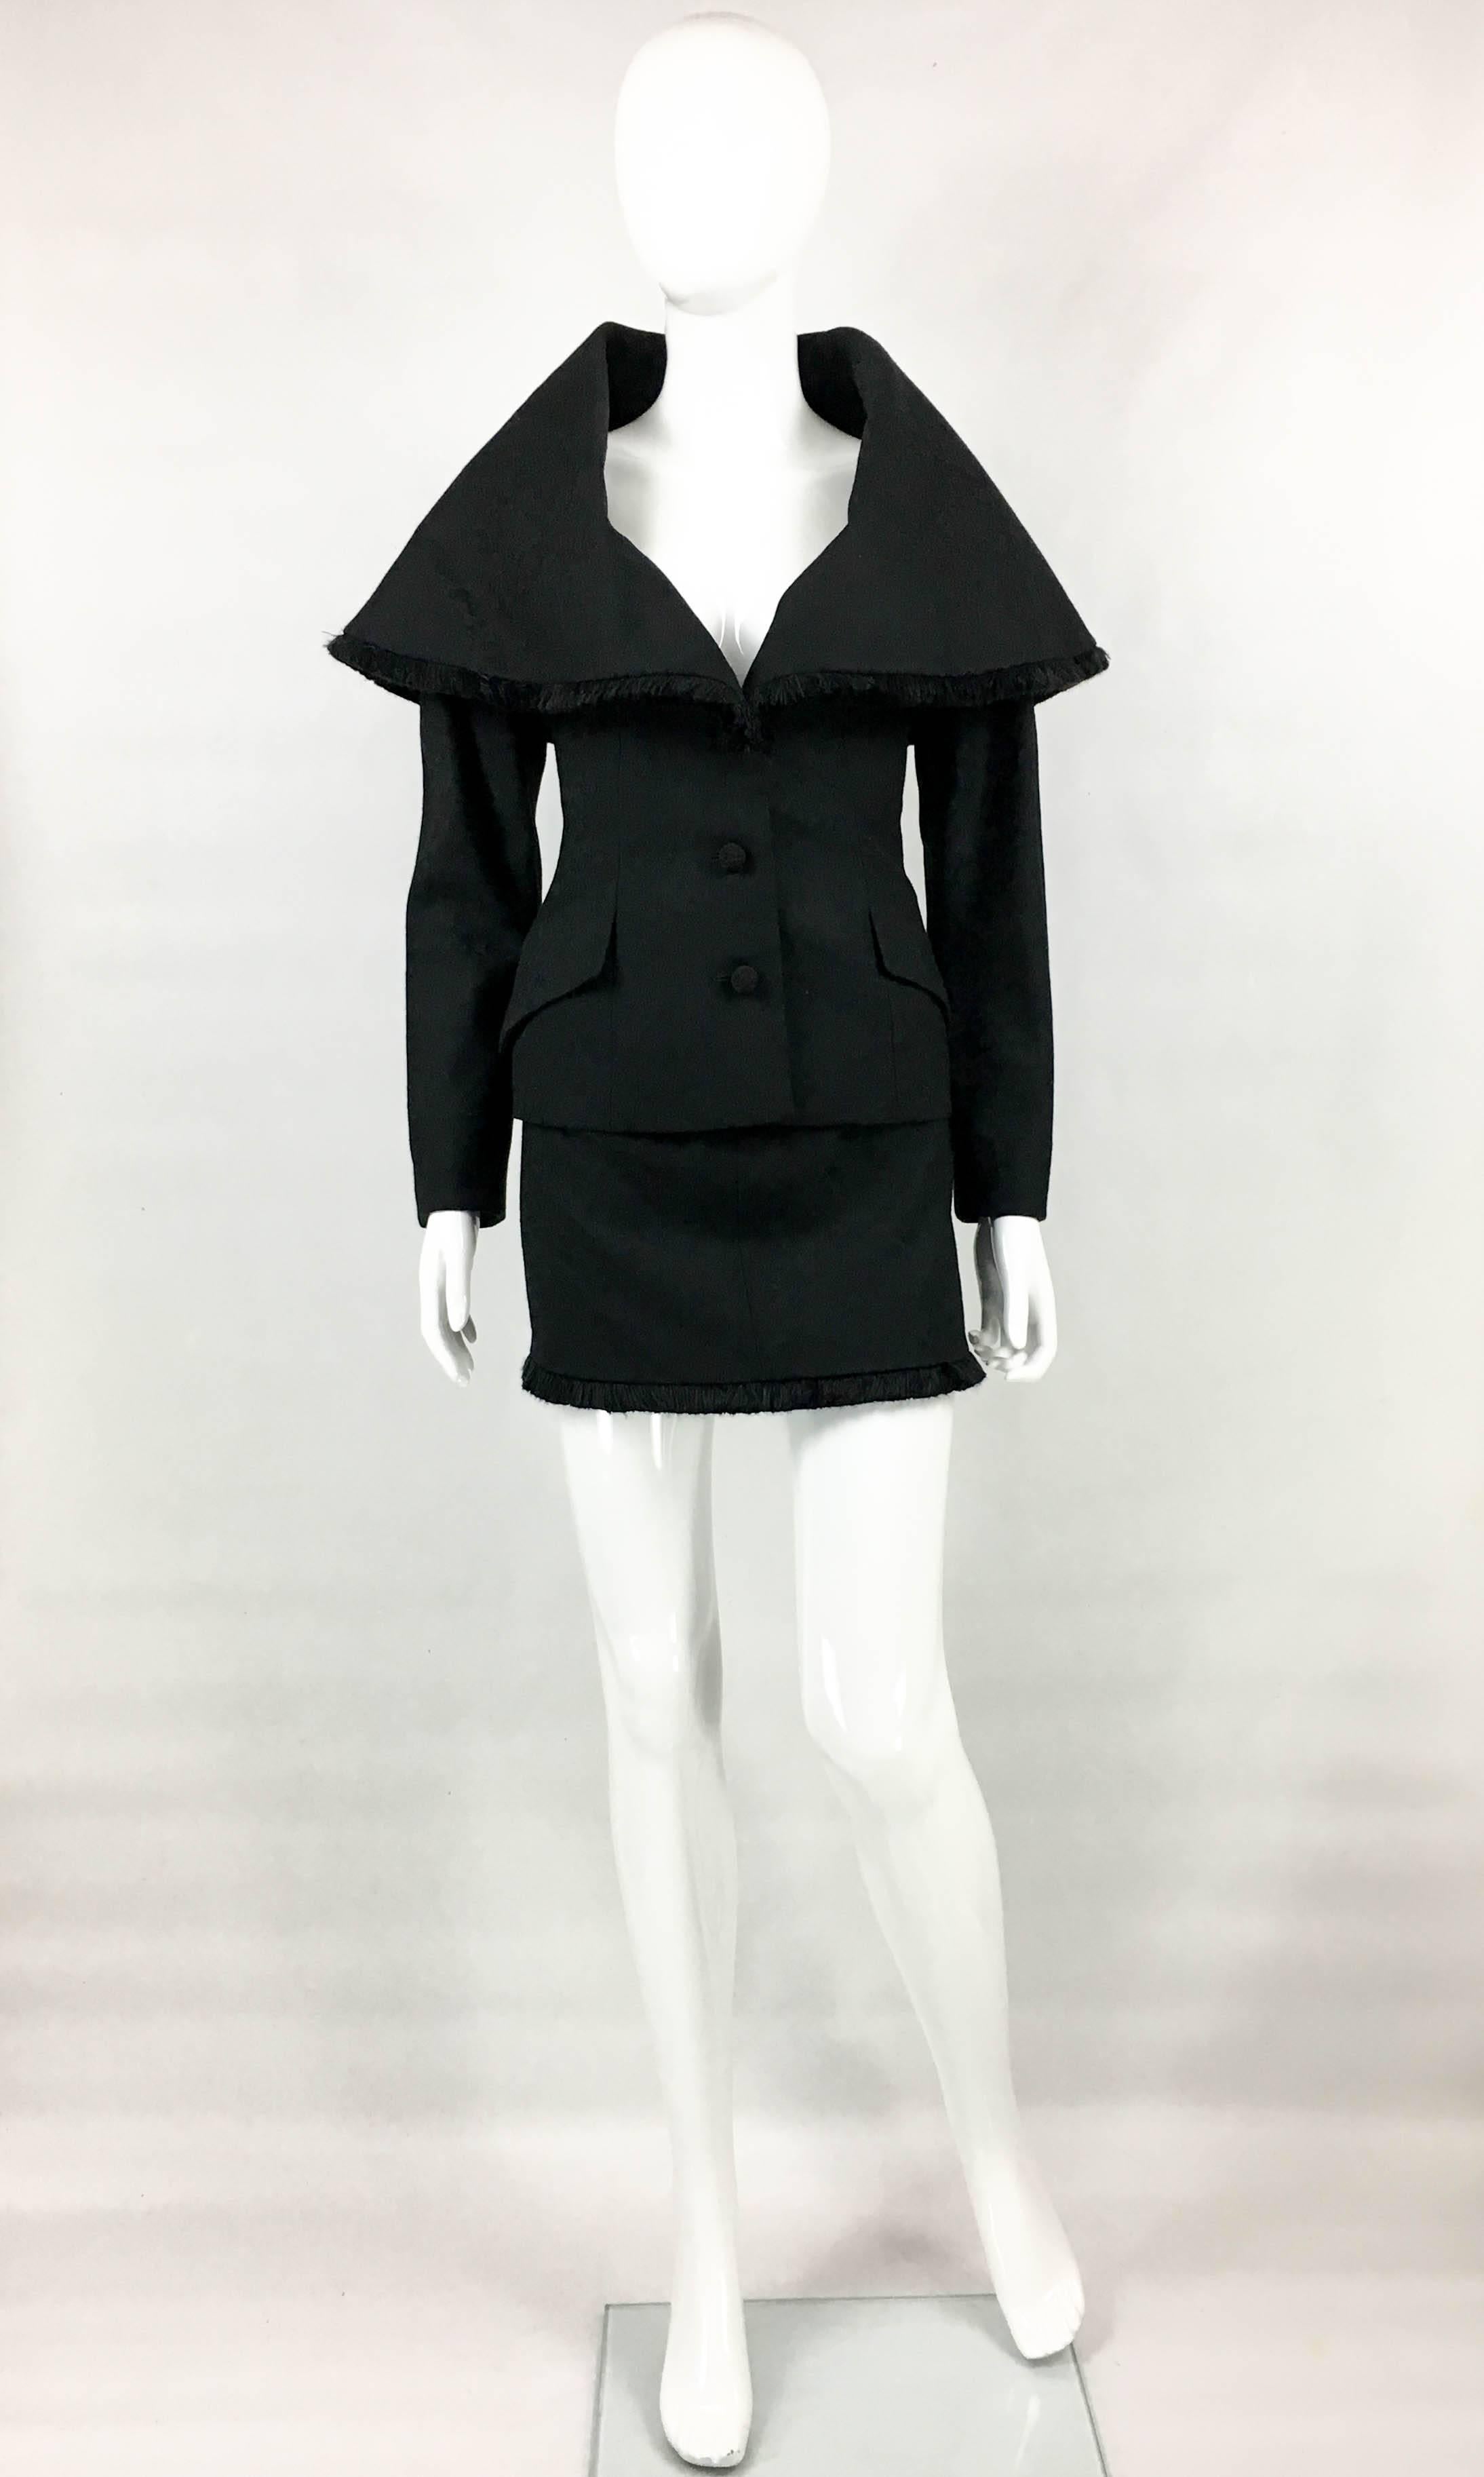 Important Vintage Dior Black Skirt Suit. This fabulous Dior by John Galliano ensemble consists of a jacket with dramatic collar and a daring mini-skirt, resulting in an explosion of elegance and sexiness. The same model appears in the Dior add